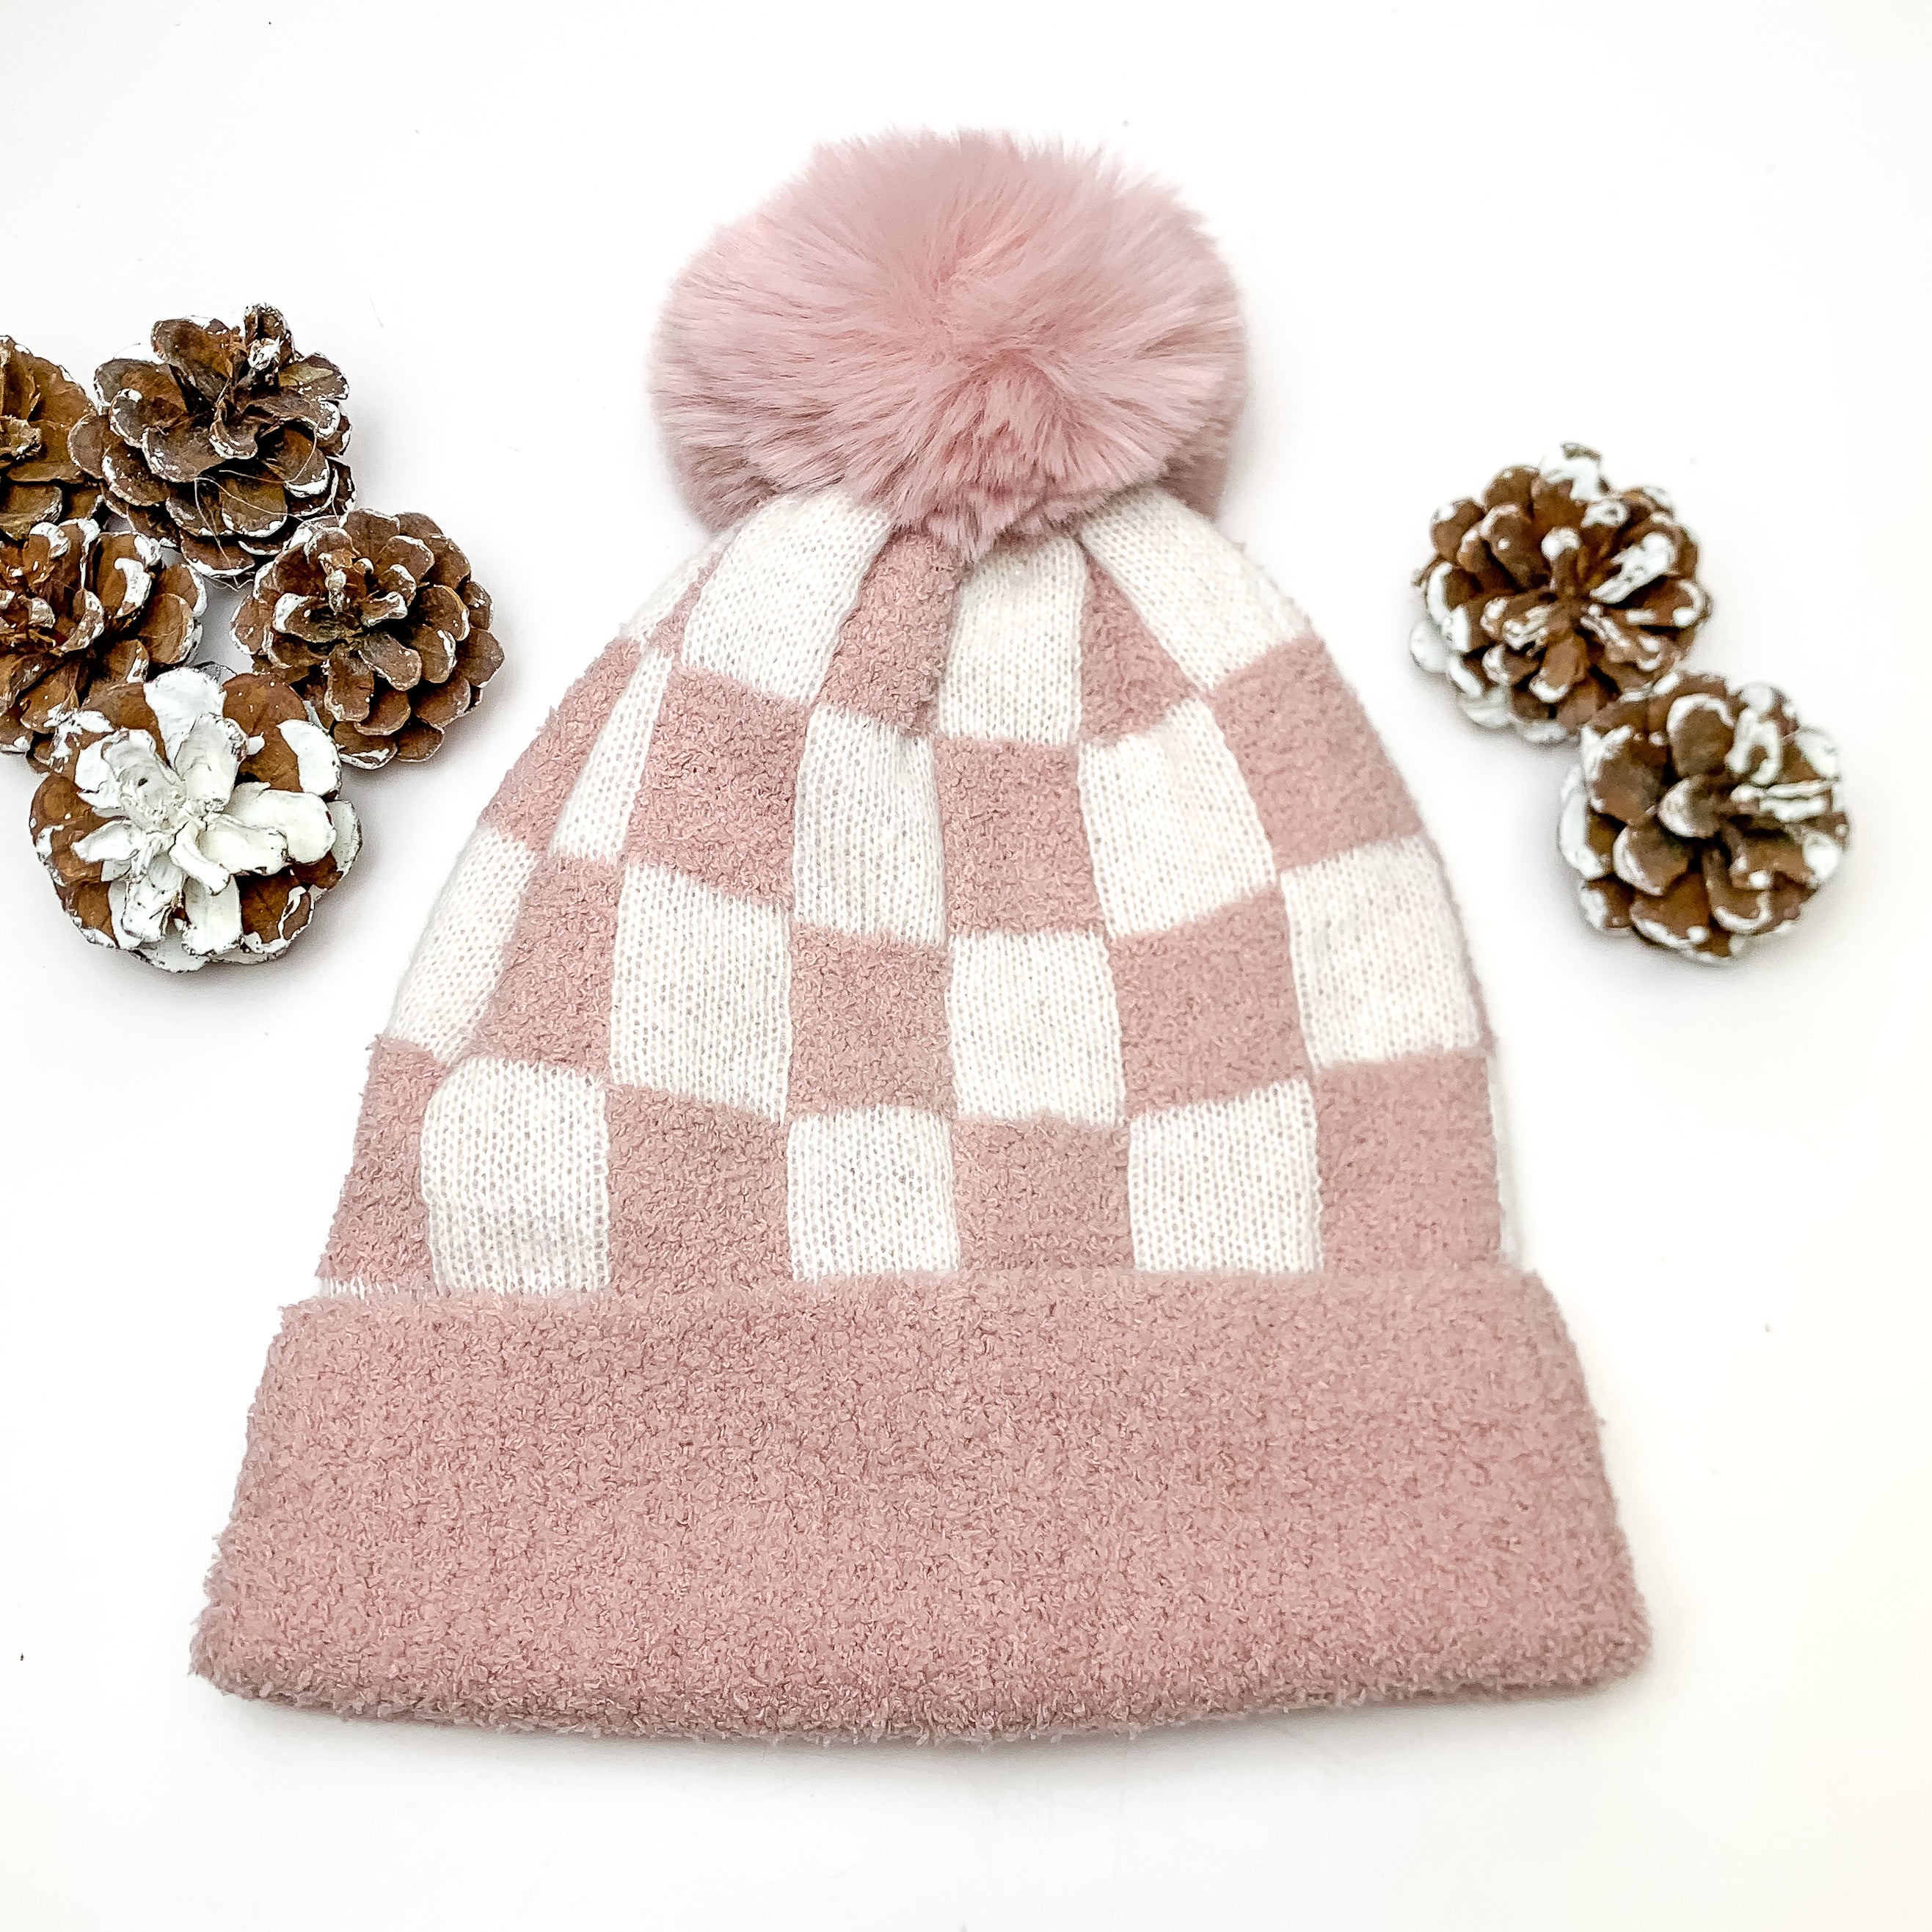 Checkered Beanie in Light Pink and White. This beanie is pictured on a white background with pinecones around it.